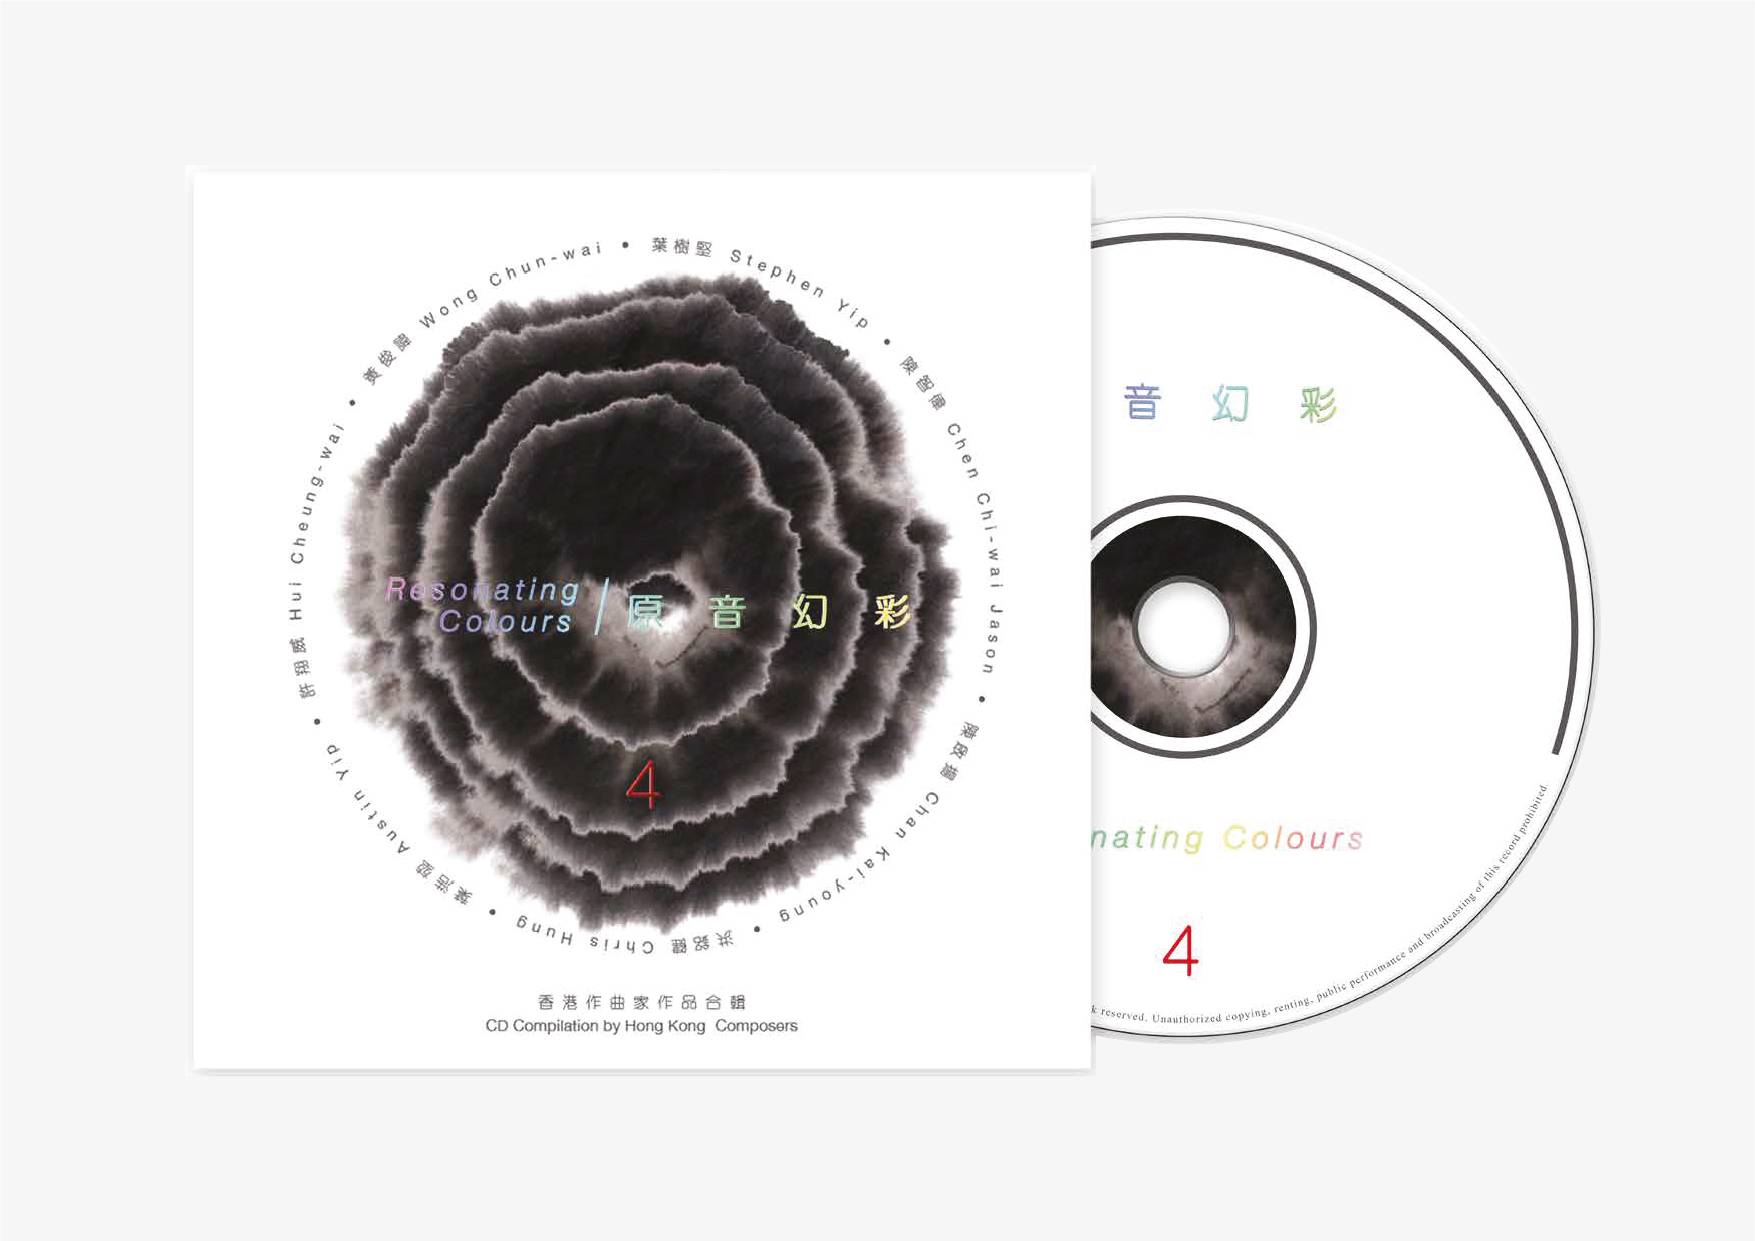 Hong Kong Composers Guild CD Album design for a disc with cover case, the main visual is ink transforming